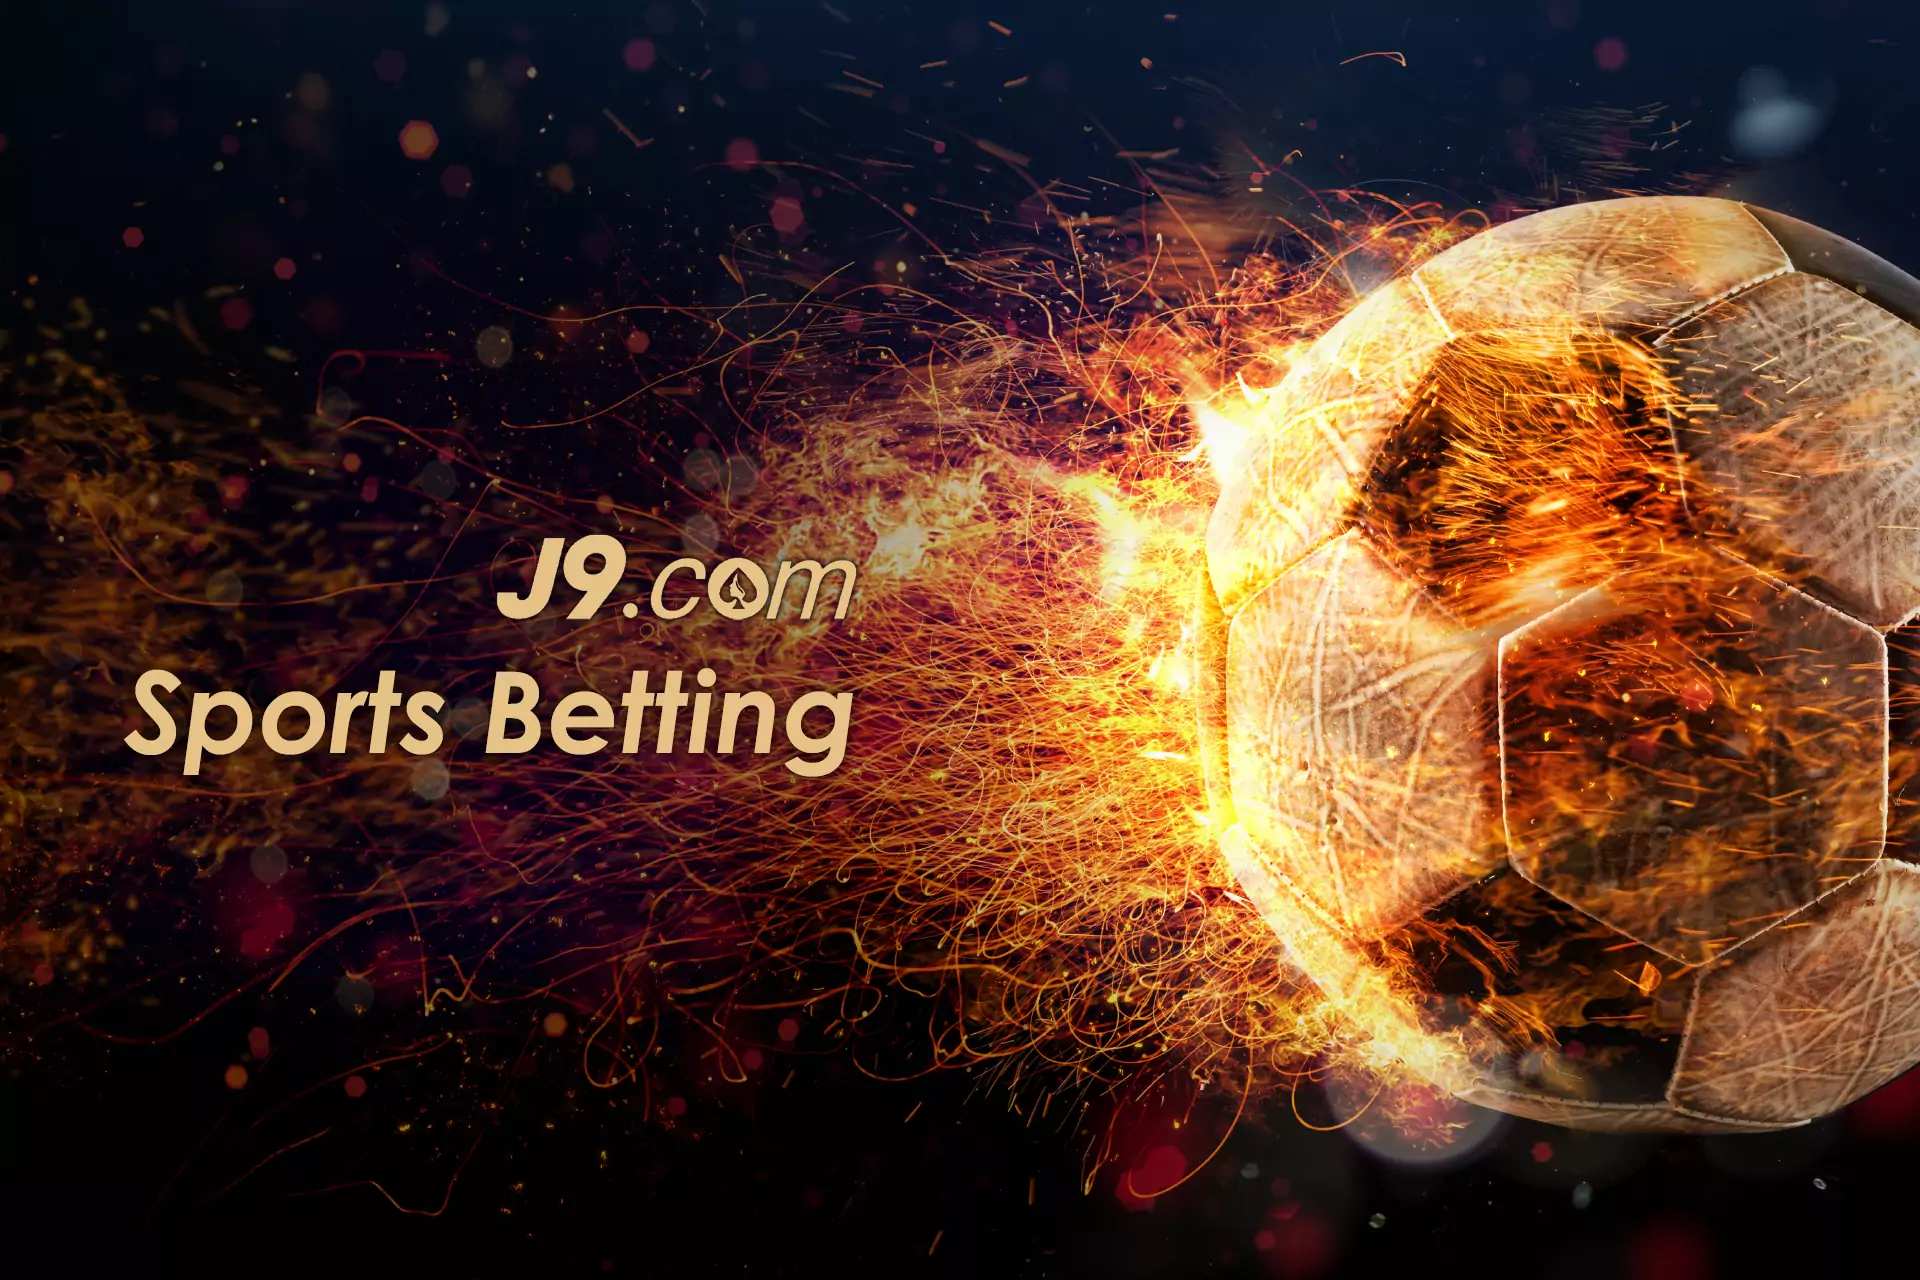 For Sports Betting, there is a special section where you can find the most popular disciplines and matches.